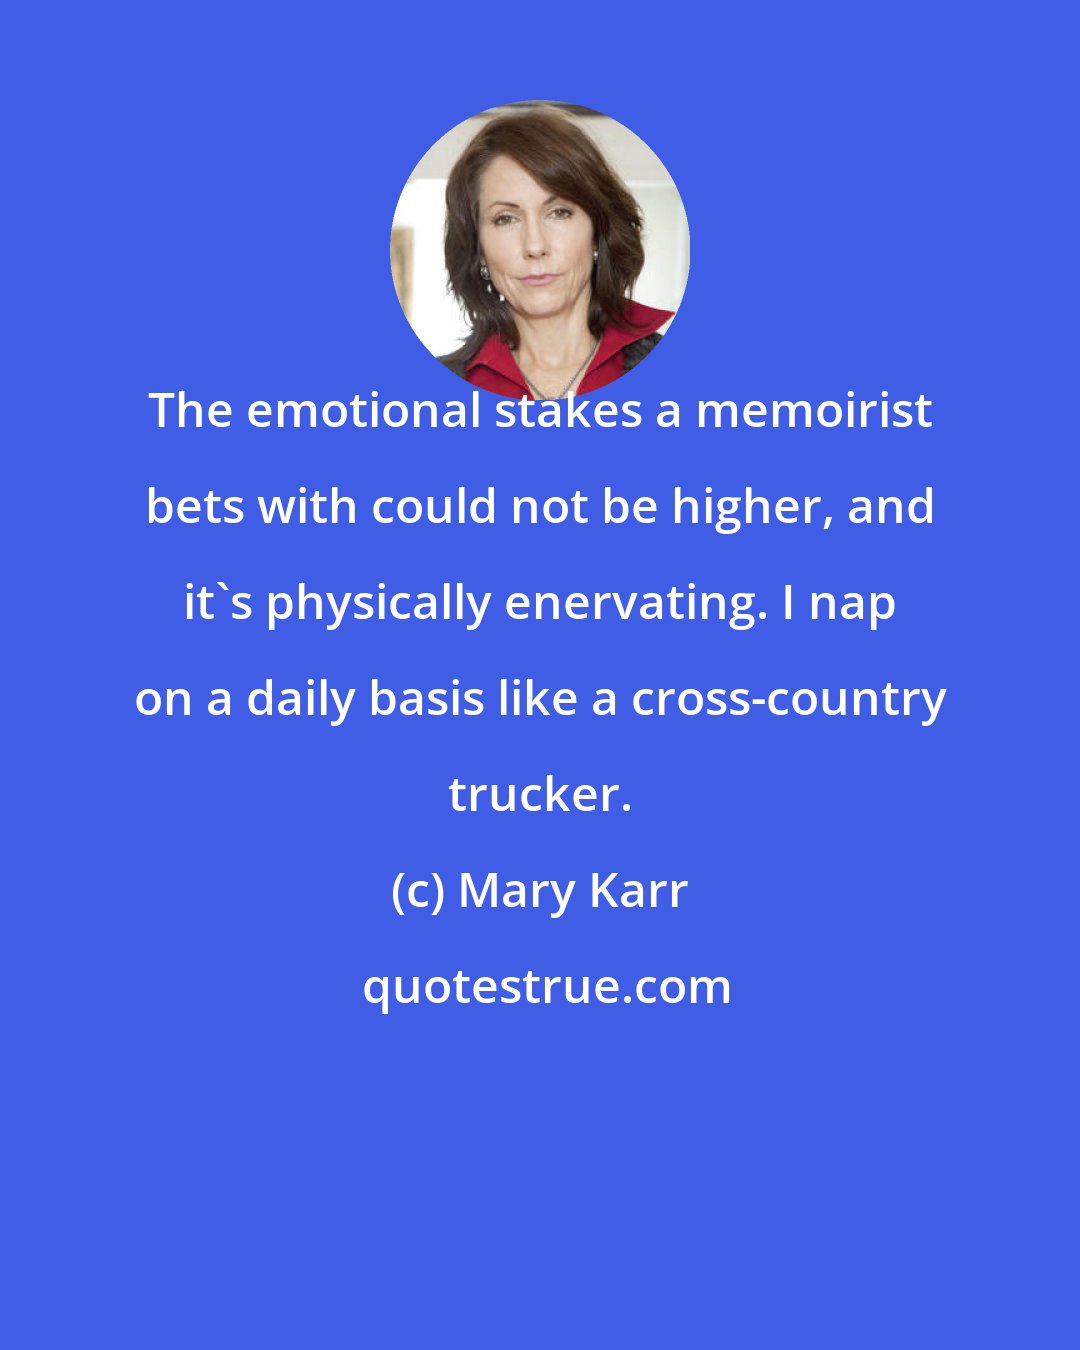 Mary Karr: The emotional stakes a memoirist bets with could not be higher, and it's physically enervating. I nap on a daily basis like a cross-country trucker.